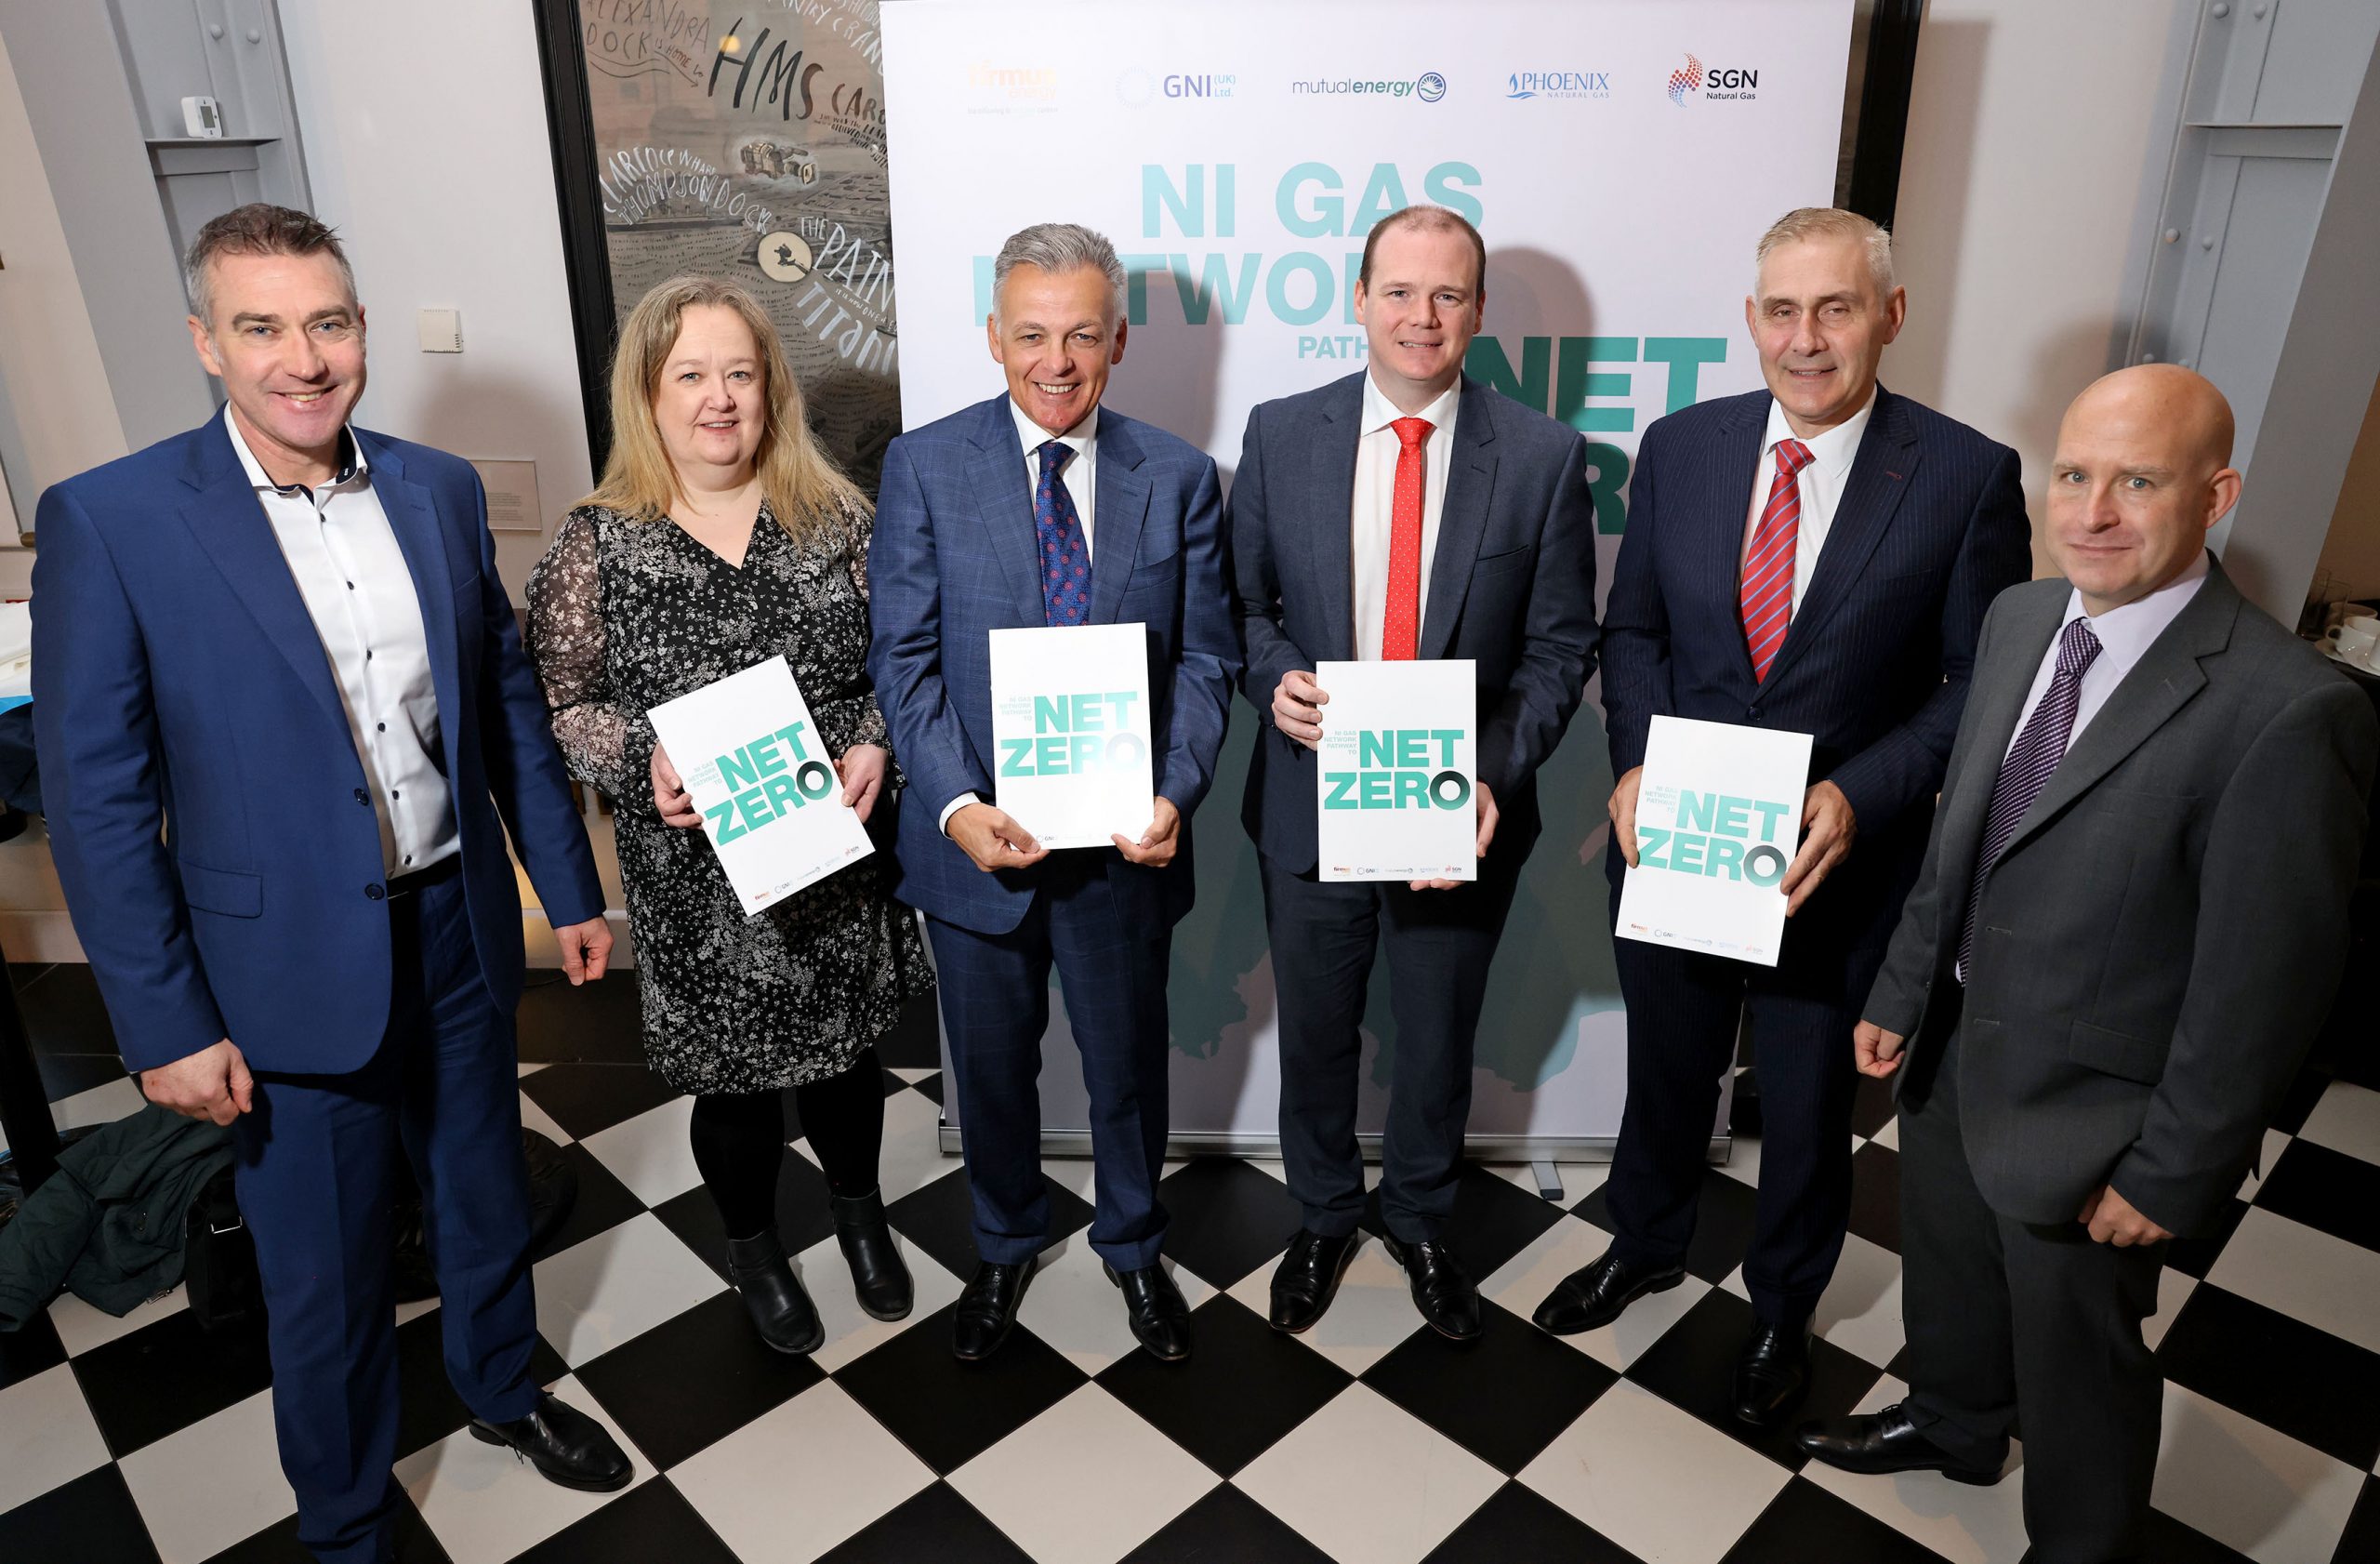 Fuelling the future: Together with the other NI Gas Network Operators